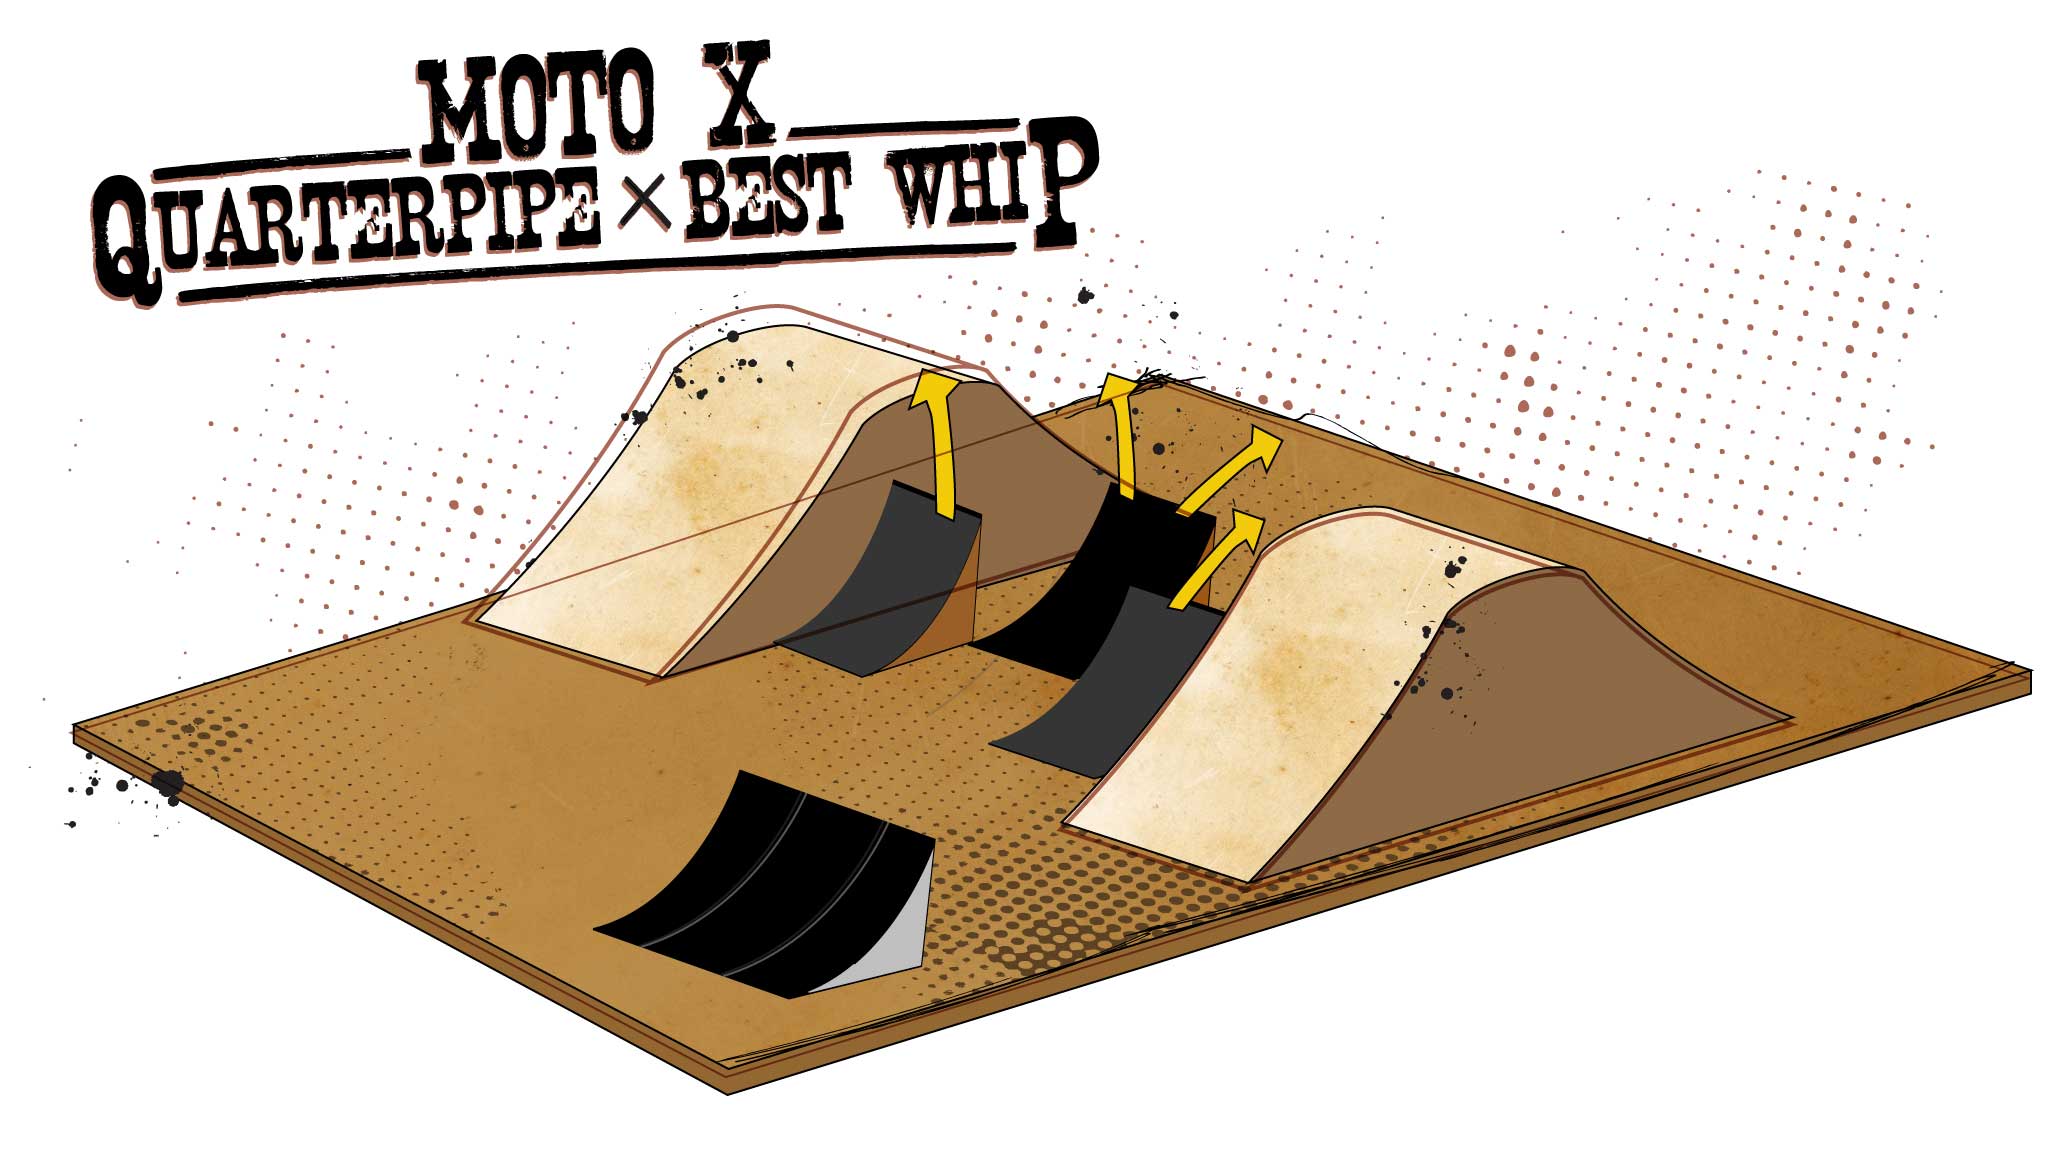 Moto X QuarterPipe and Best Whip